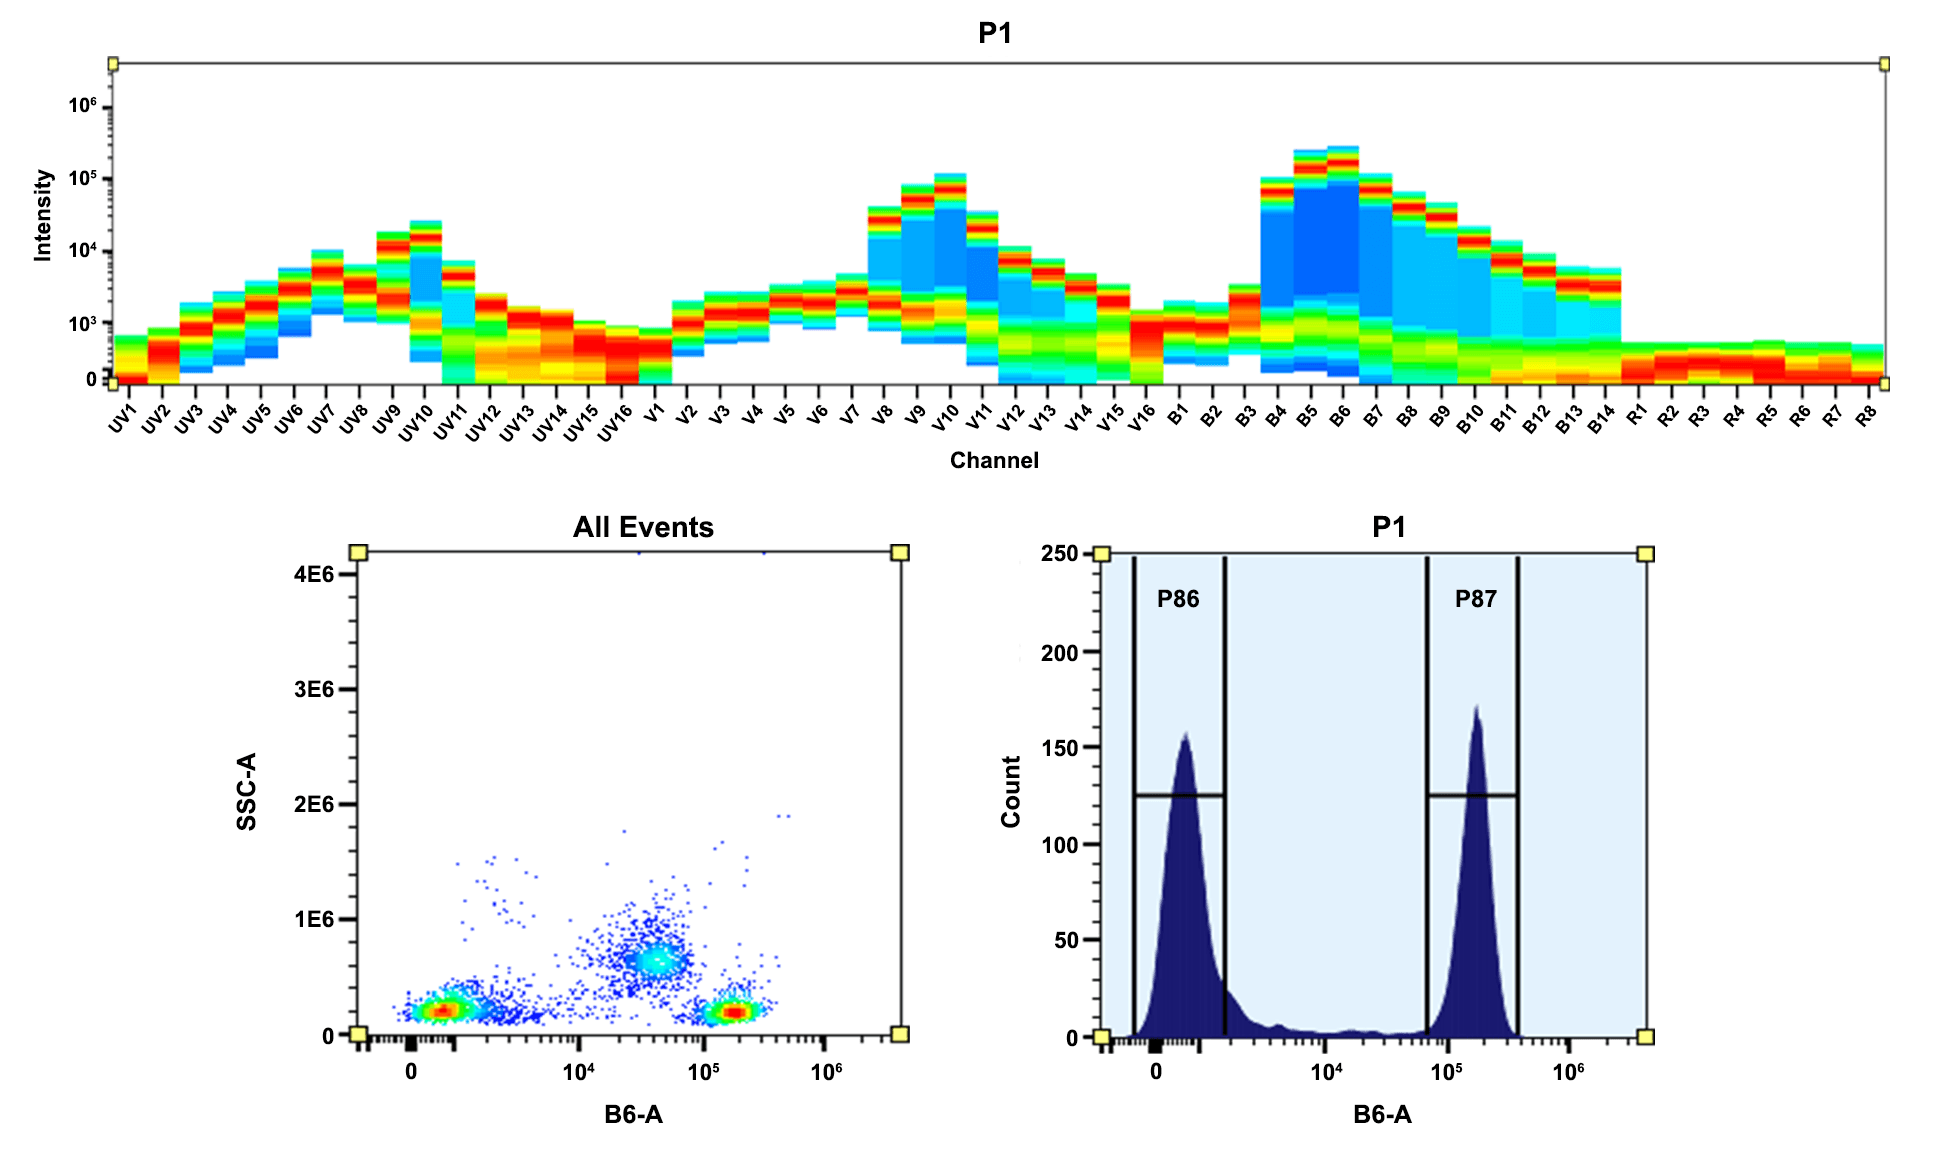 Top) Spectral pattern was generated using a 4-laser spectral cytometer. Spatially offset lasers (355 nm, 405 nm, 488 nm, and 640 nm) were used to create four distinct emission profiles, then, when combined, yielded the overall spectral signature. Bottom) Flow cytometry analysis of PBMC stained with PE/iFlour® 597 anti-human CD4 *SK3* conjugate. The fluorescence signal was monitored using an Aurora flow cytometer in the PE/iFluor® 597 specific B6-A channel.